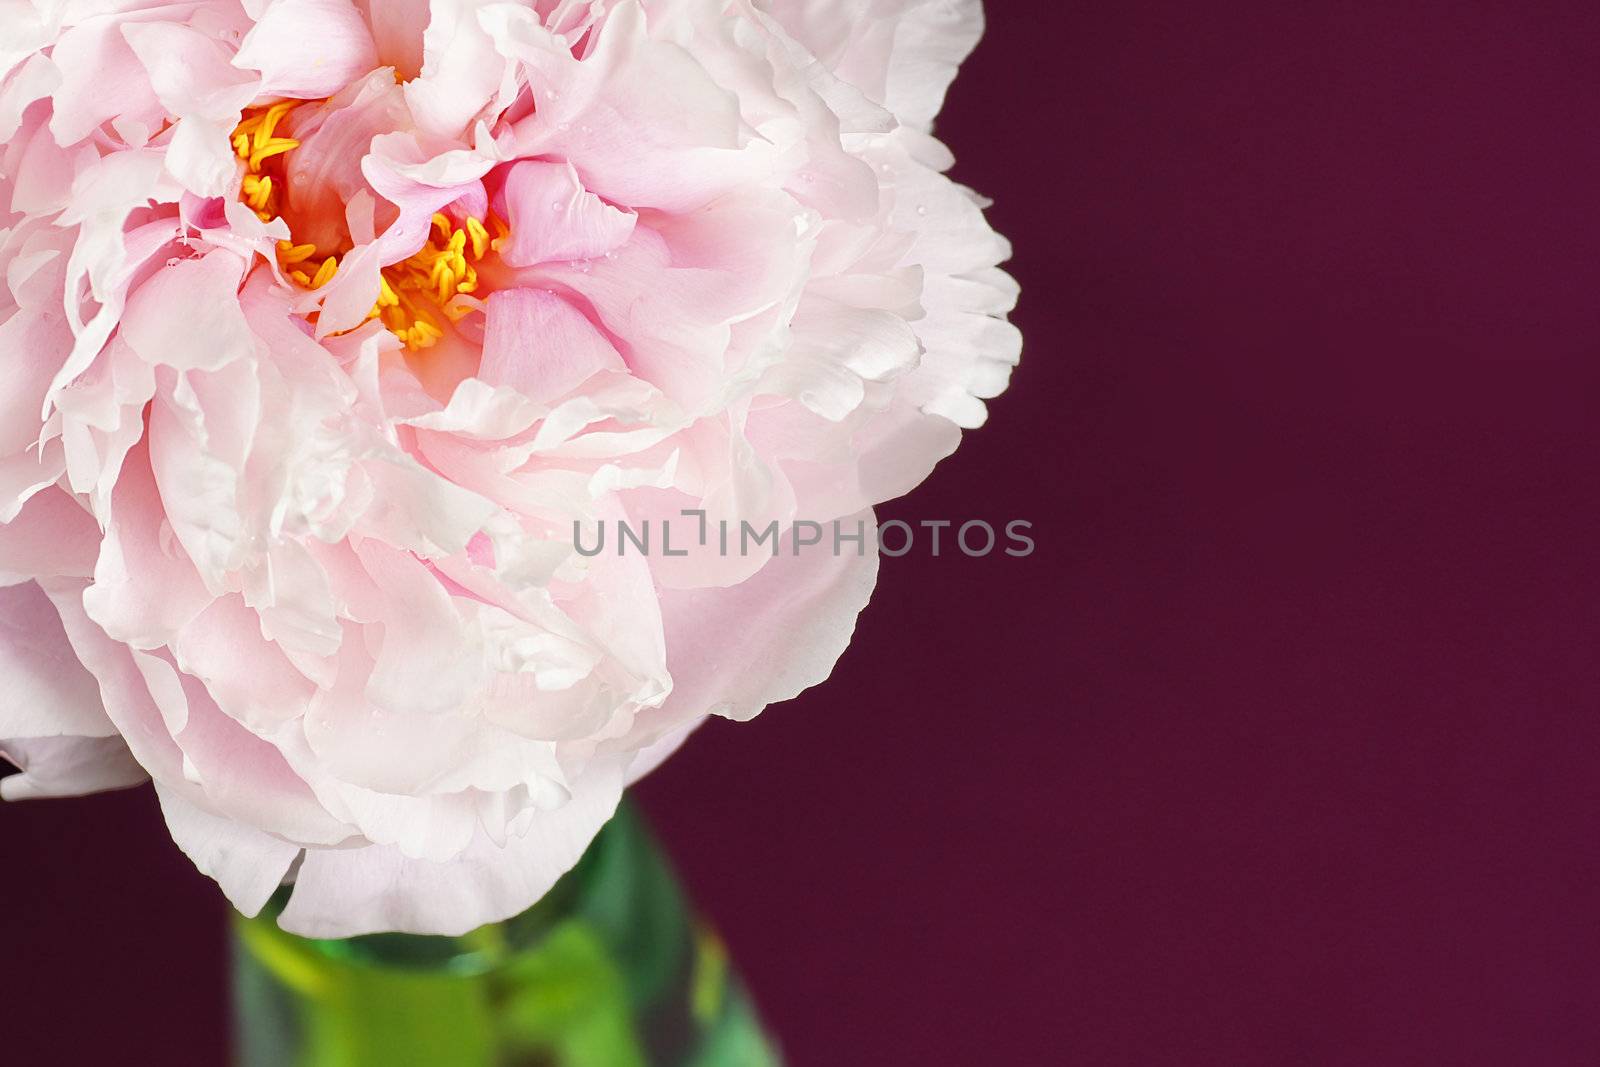 Beautiful macro of pale pink peony flower in a transparent cristal vase over dramatic burgundy background.